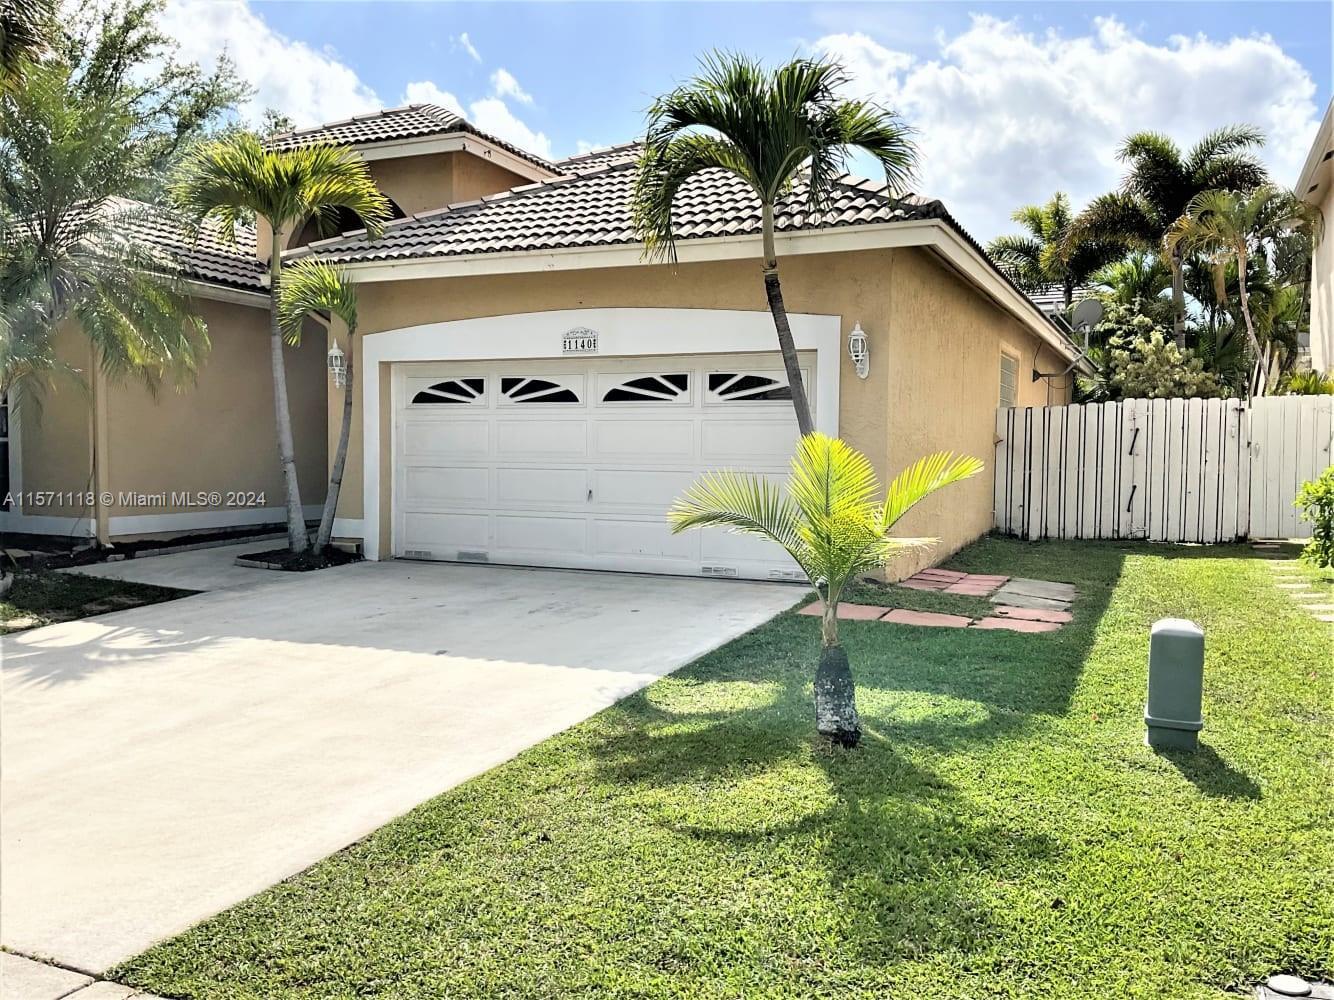 Photo of 1140 NW 184th Ter in Pembroke Pines, FL